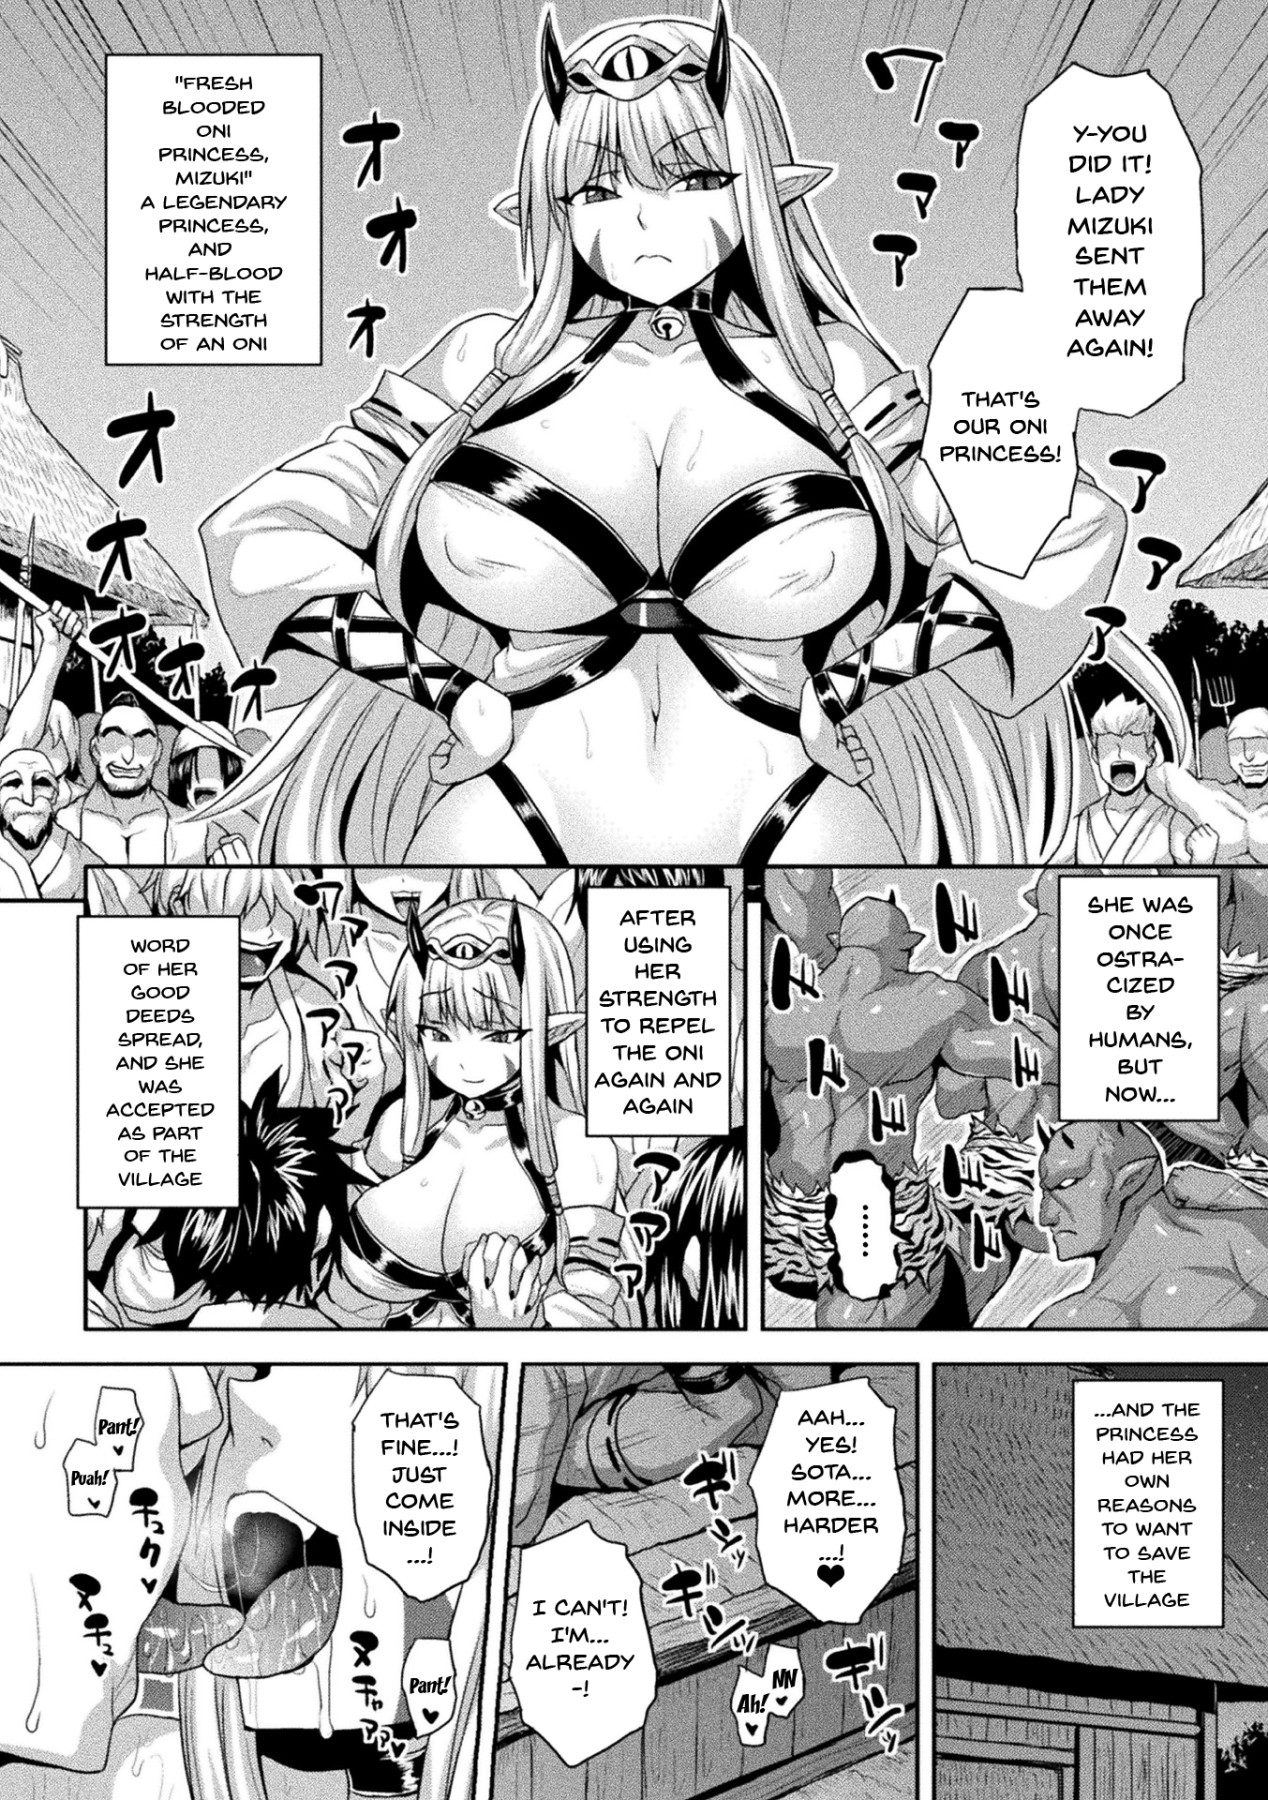 Hentai Manga Comic-The Woman Who's Fallen Into Being a Slut In Defeat-Chapter 3-2